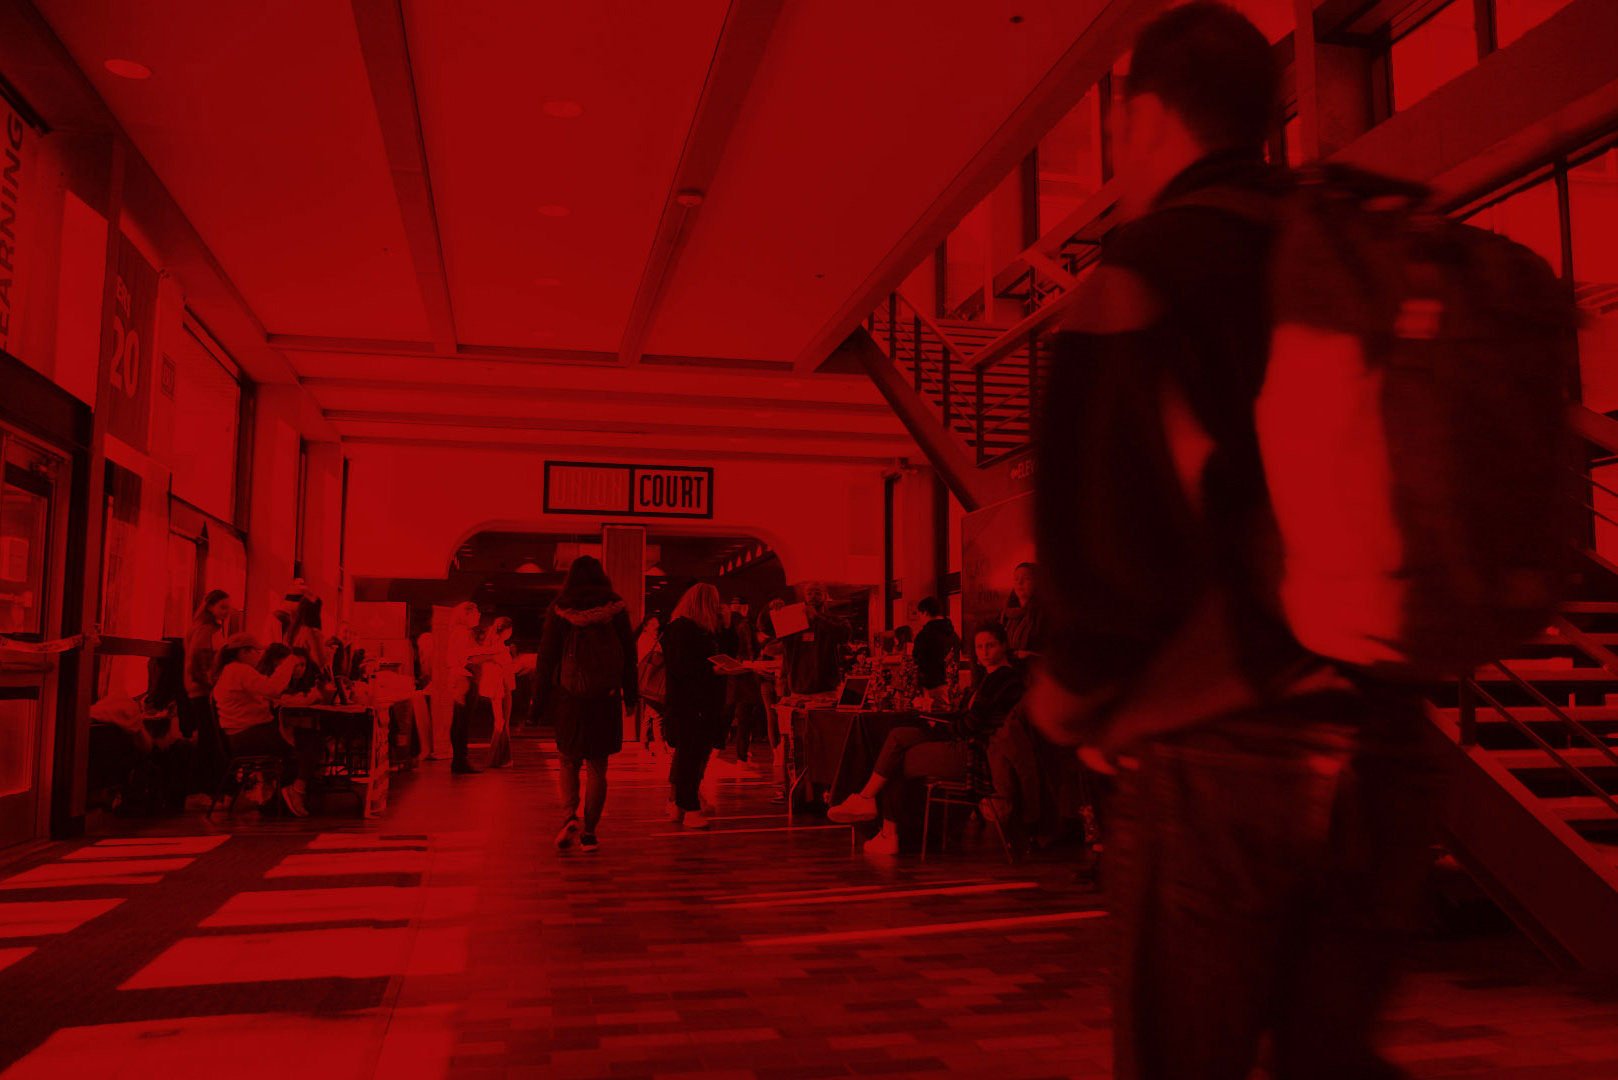 Still from "Students on the Issues That Matter Most to Them in the 2020 Presidential Election" video; photo of students walking in the hallway leading to Union Court with red overlay.